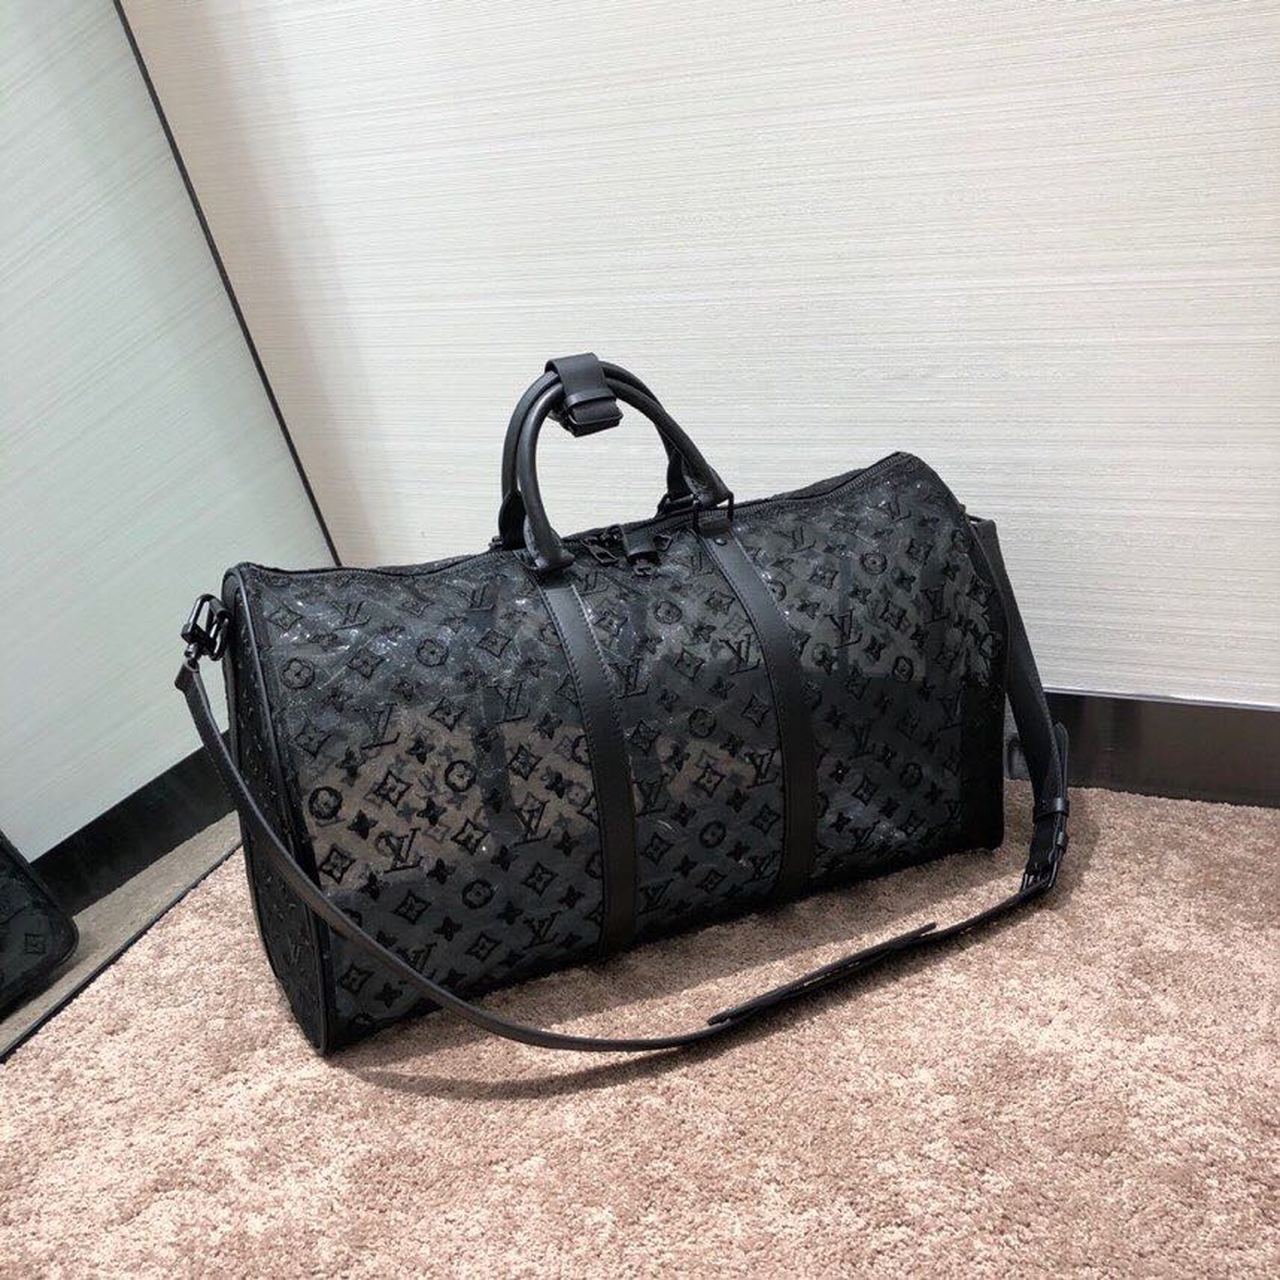 LV Keepall Bandouliere 50 Monogram Black By Virgil Abloh For Women, WoBags, Shoulder And Crossbody Bags 19.7in/50cm LV M53971